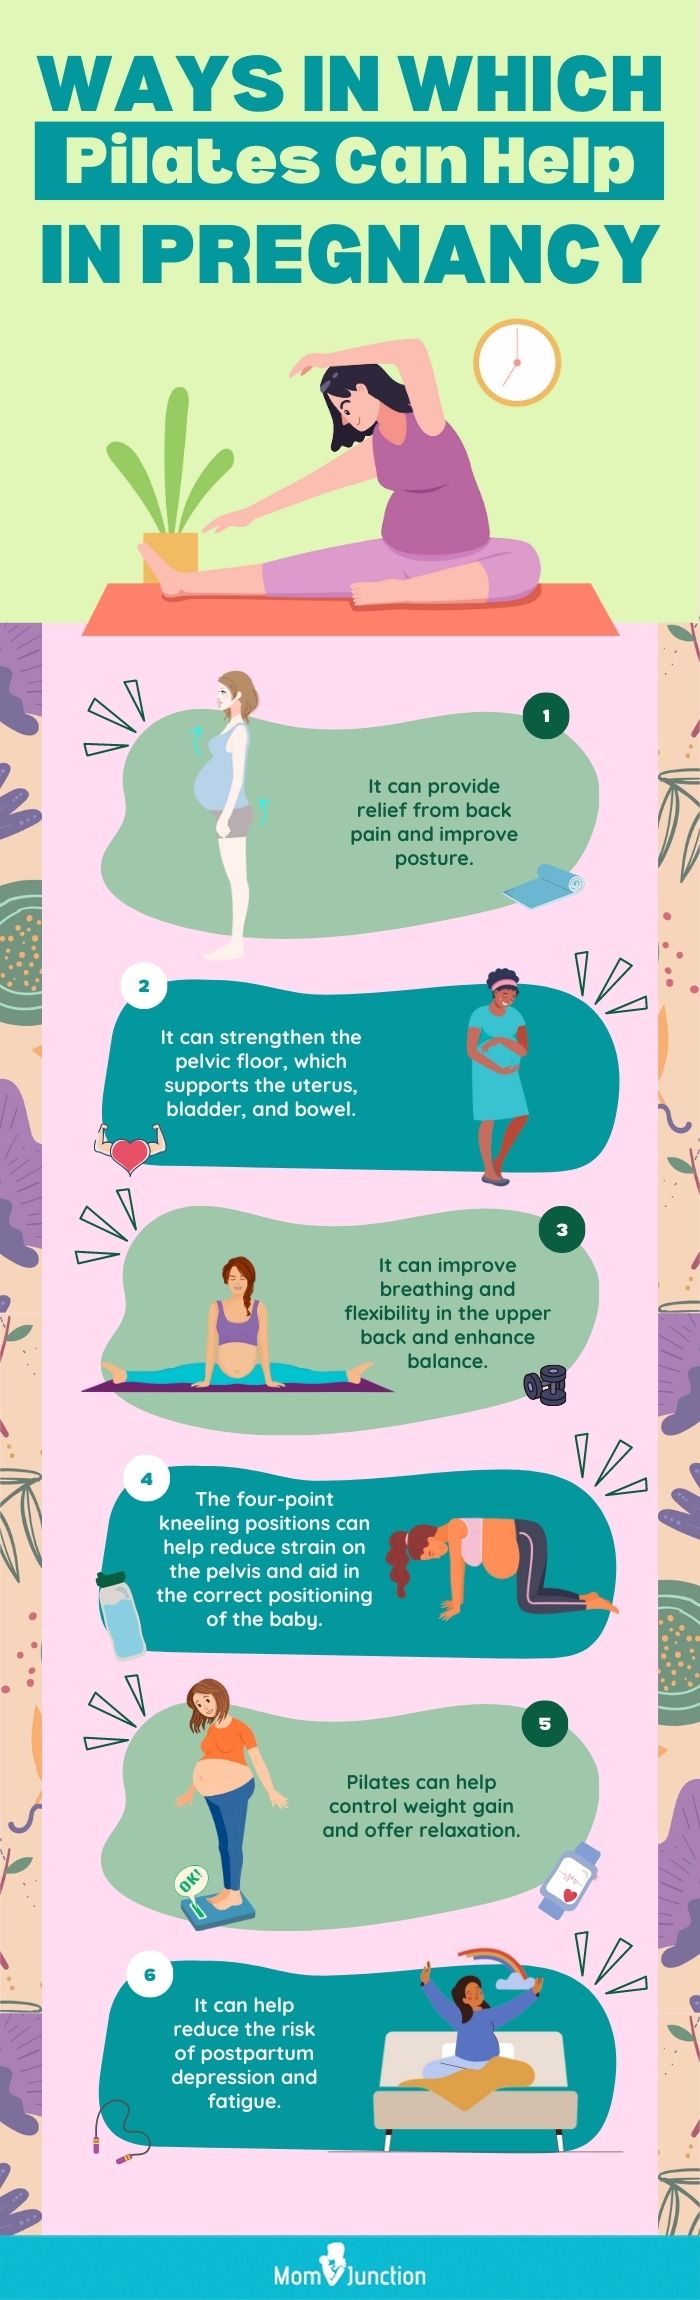 ways in which pilates can help in pregnancy (infographic)